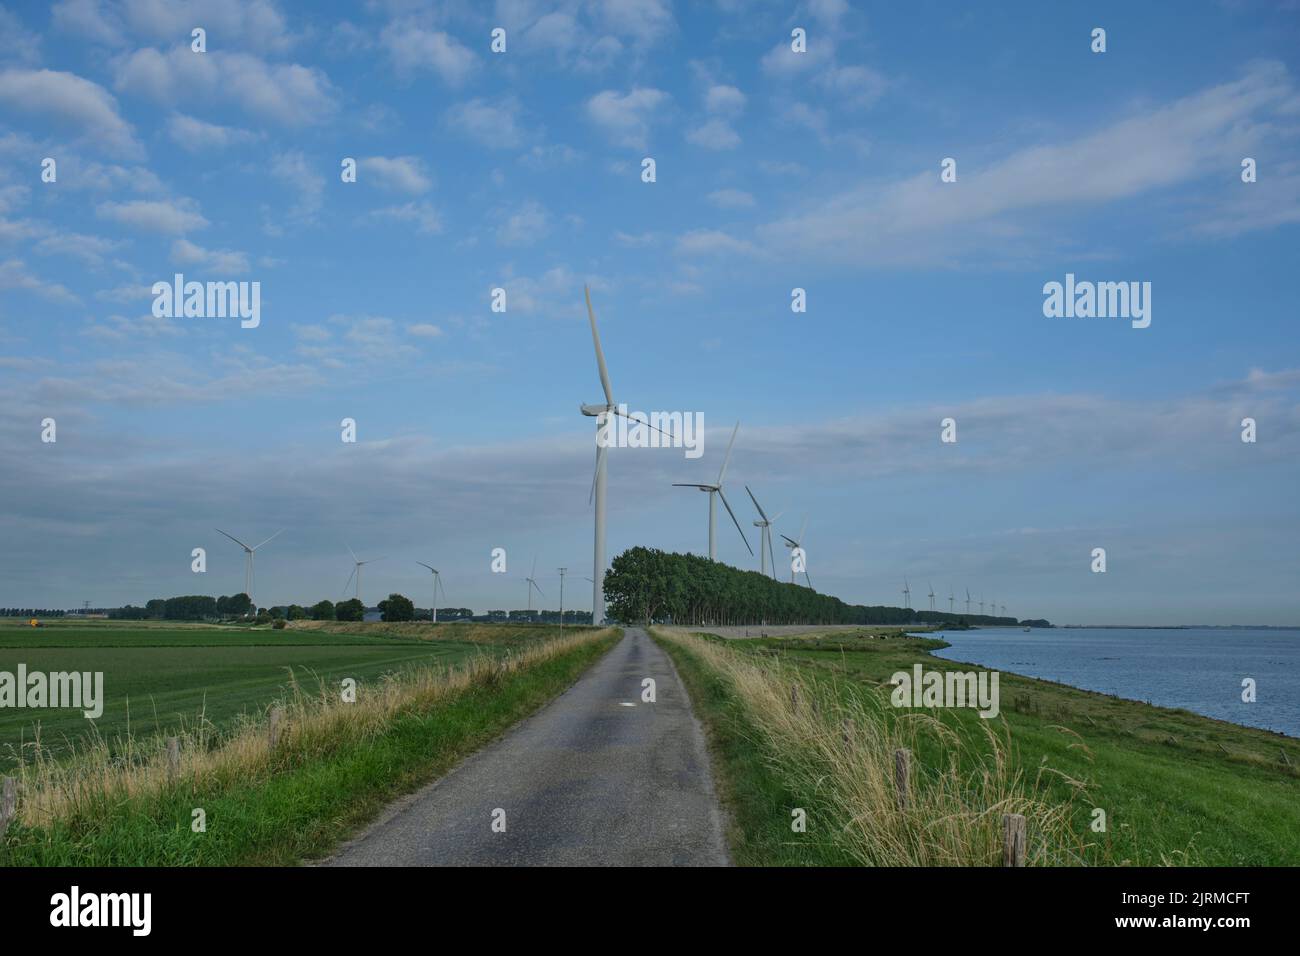 Windmill park in the Netherlands. The wind farm produce electricity to provide electricity for households in the Netherlands Stock Photo